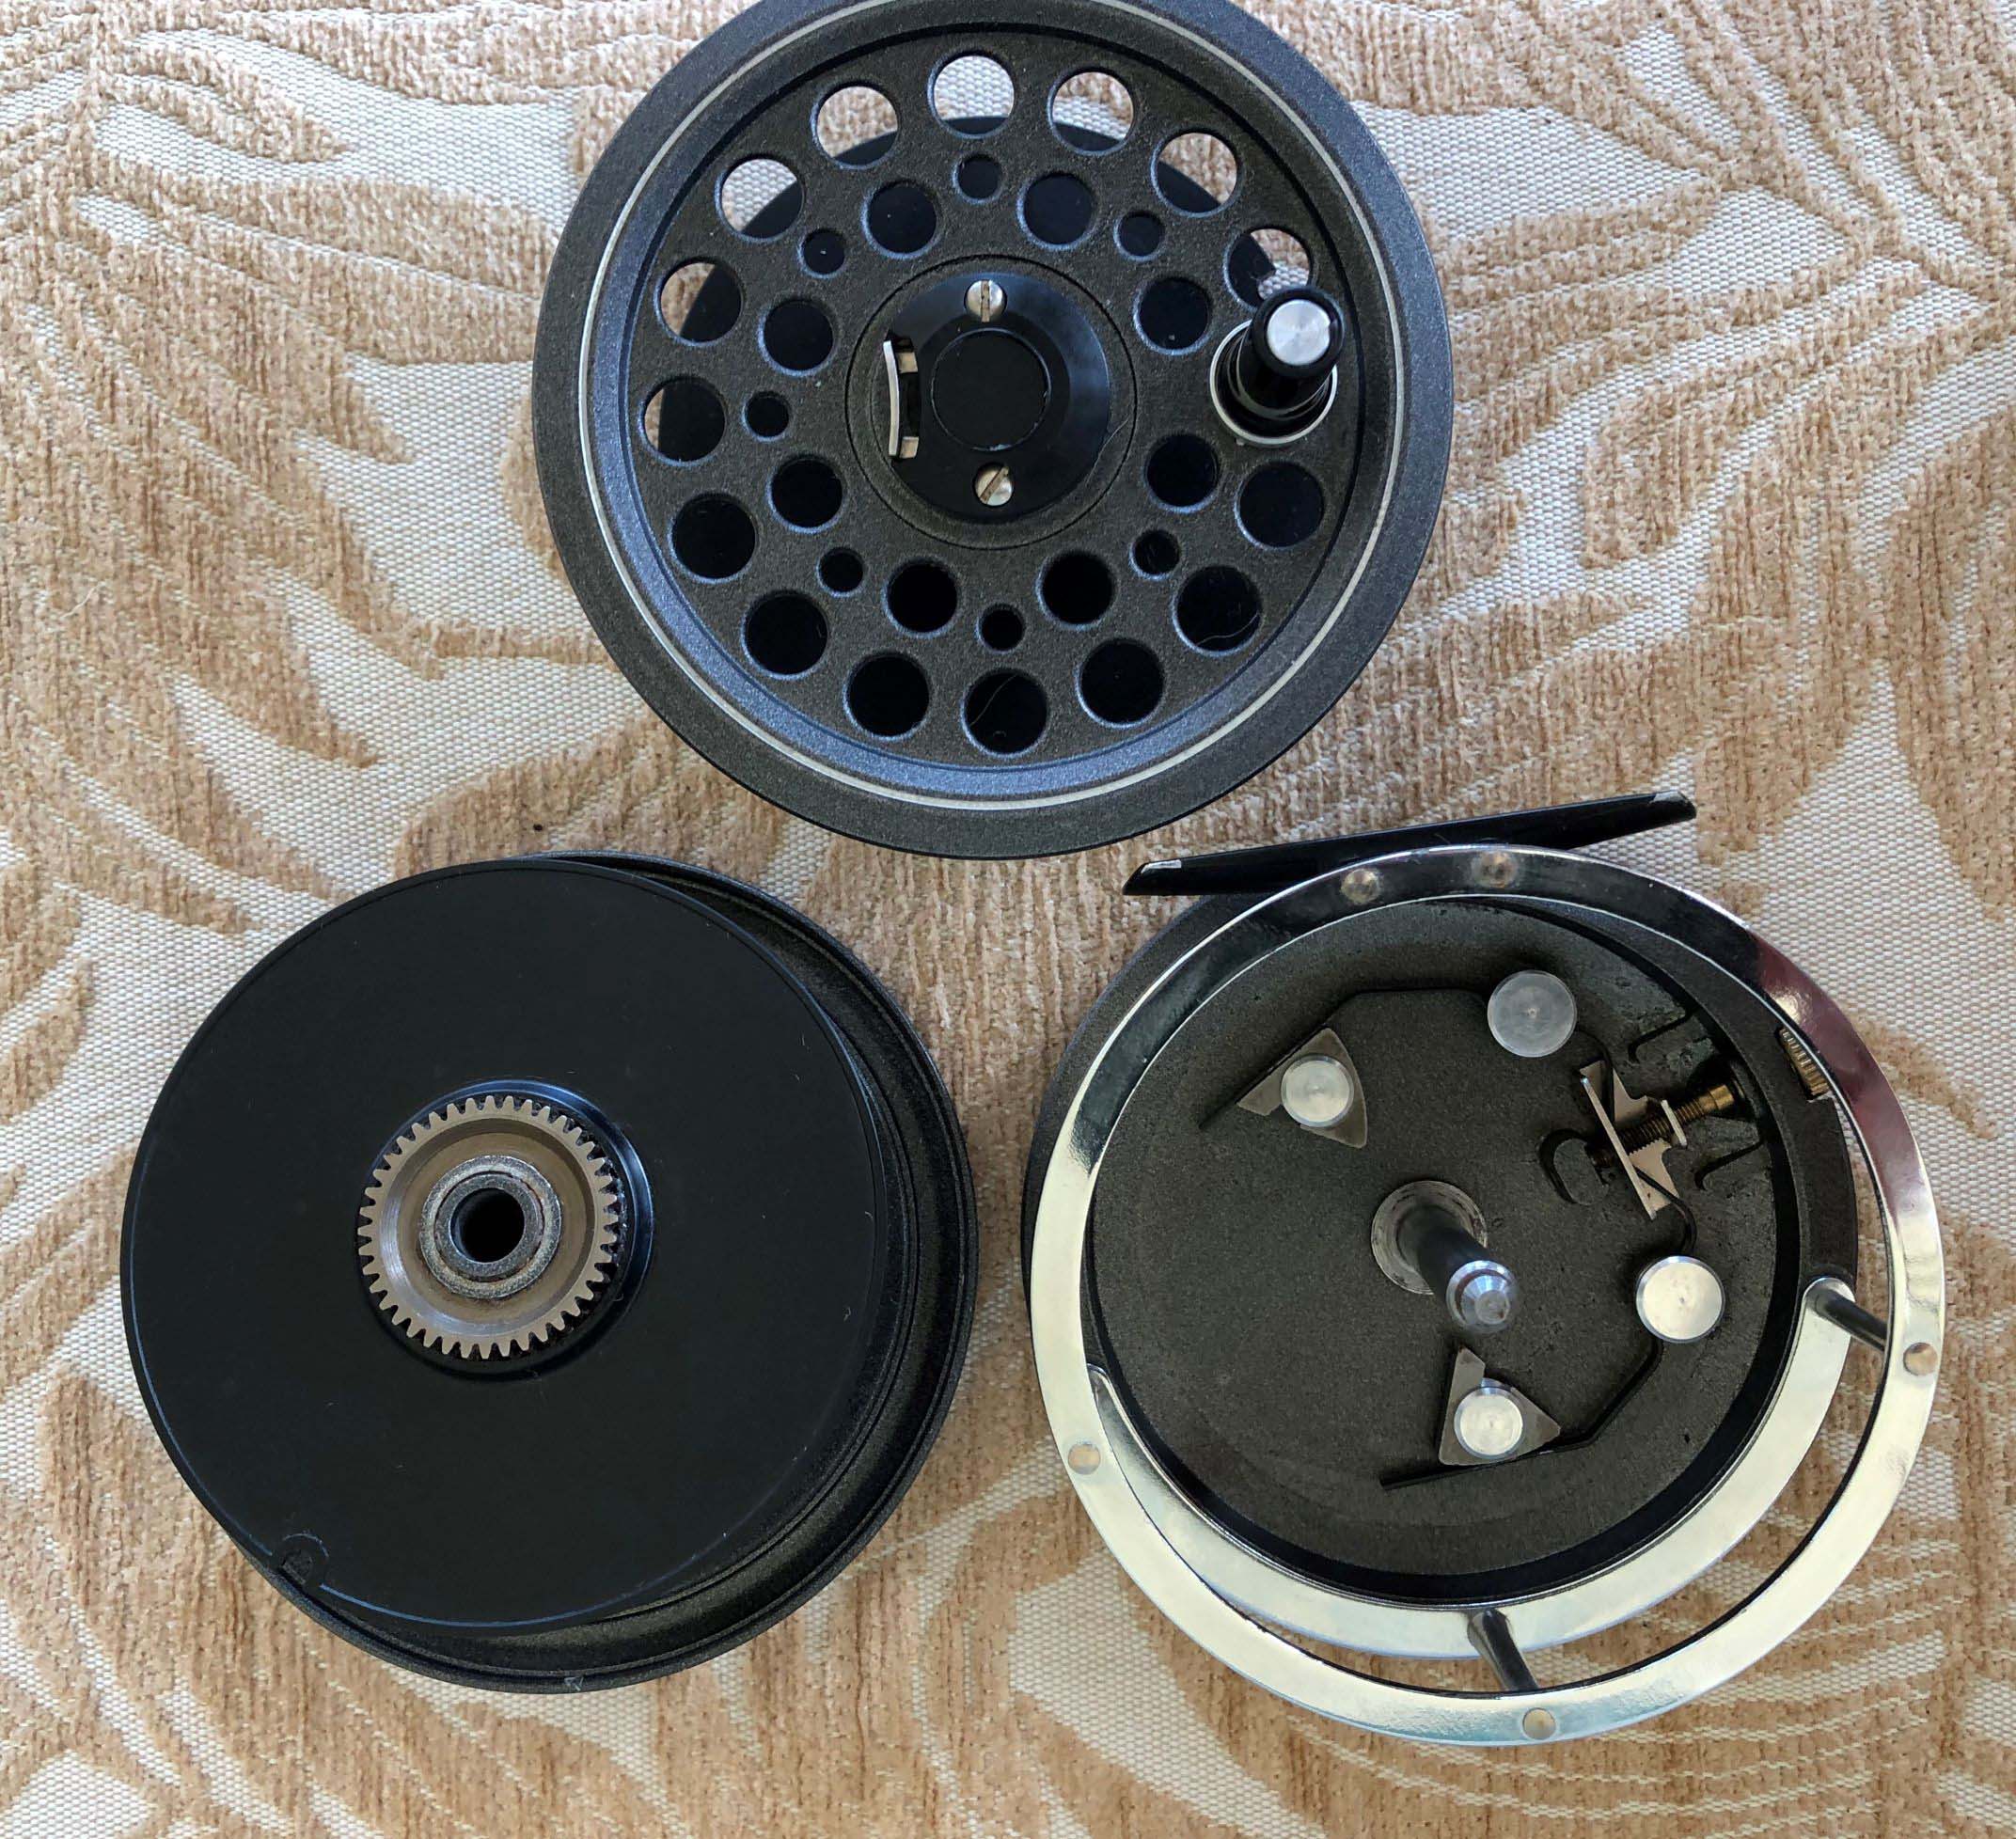 Daiwa 710 Fly Reel #5/6 Used Excellent Condition Vintage From